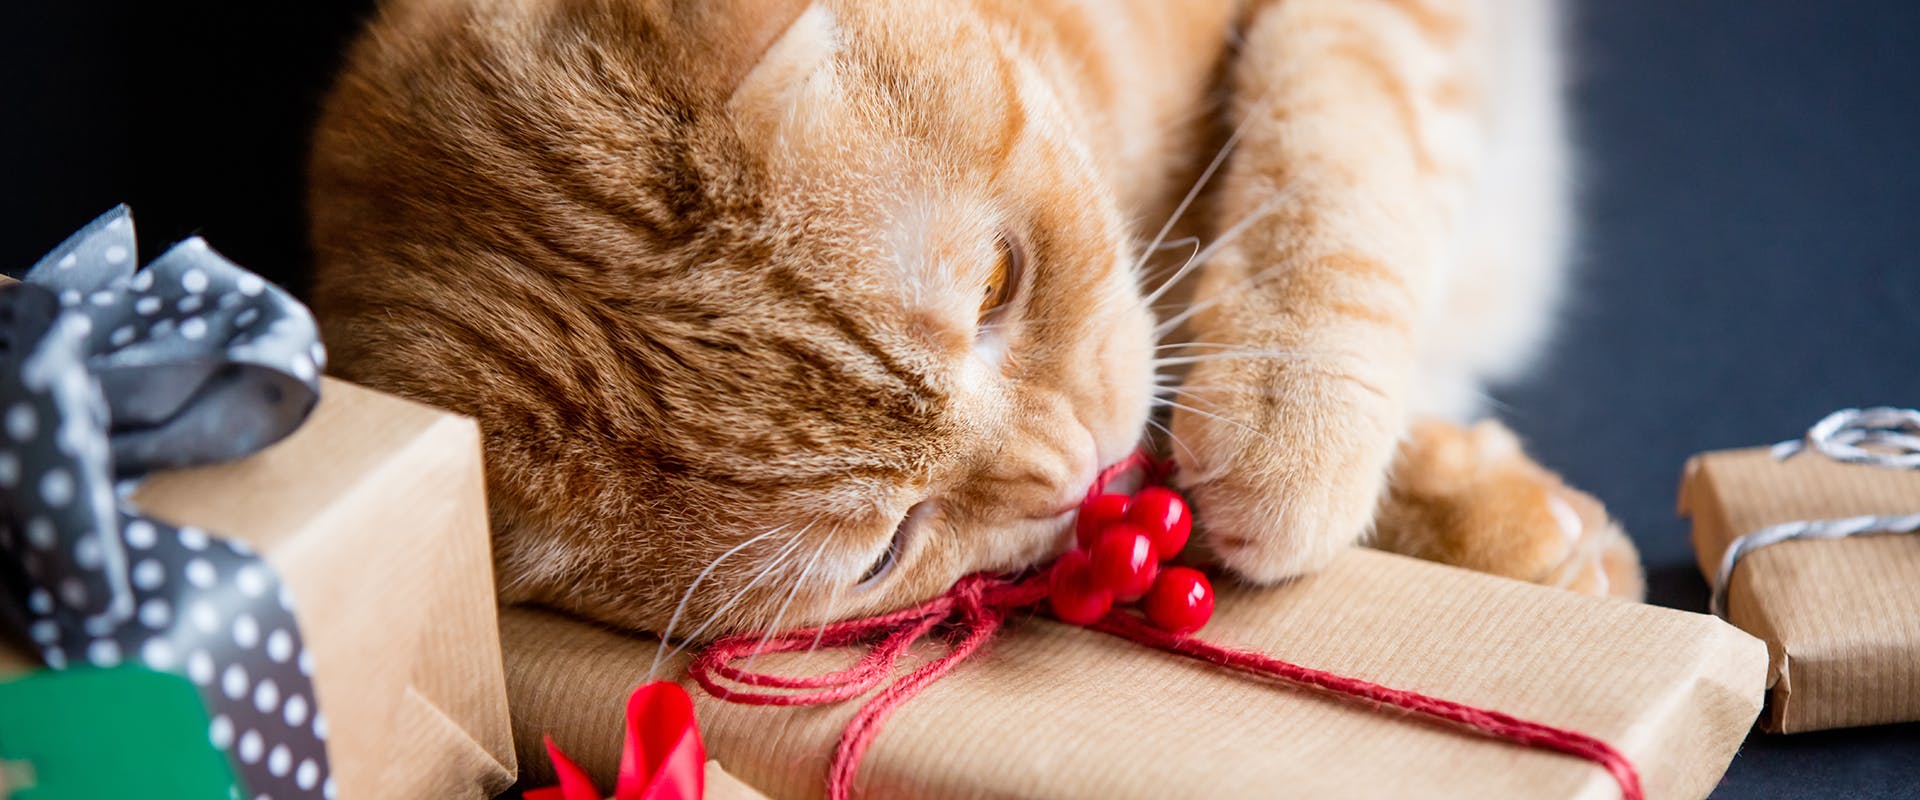 A cat sleeping on a pile of Christmas presents